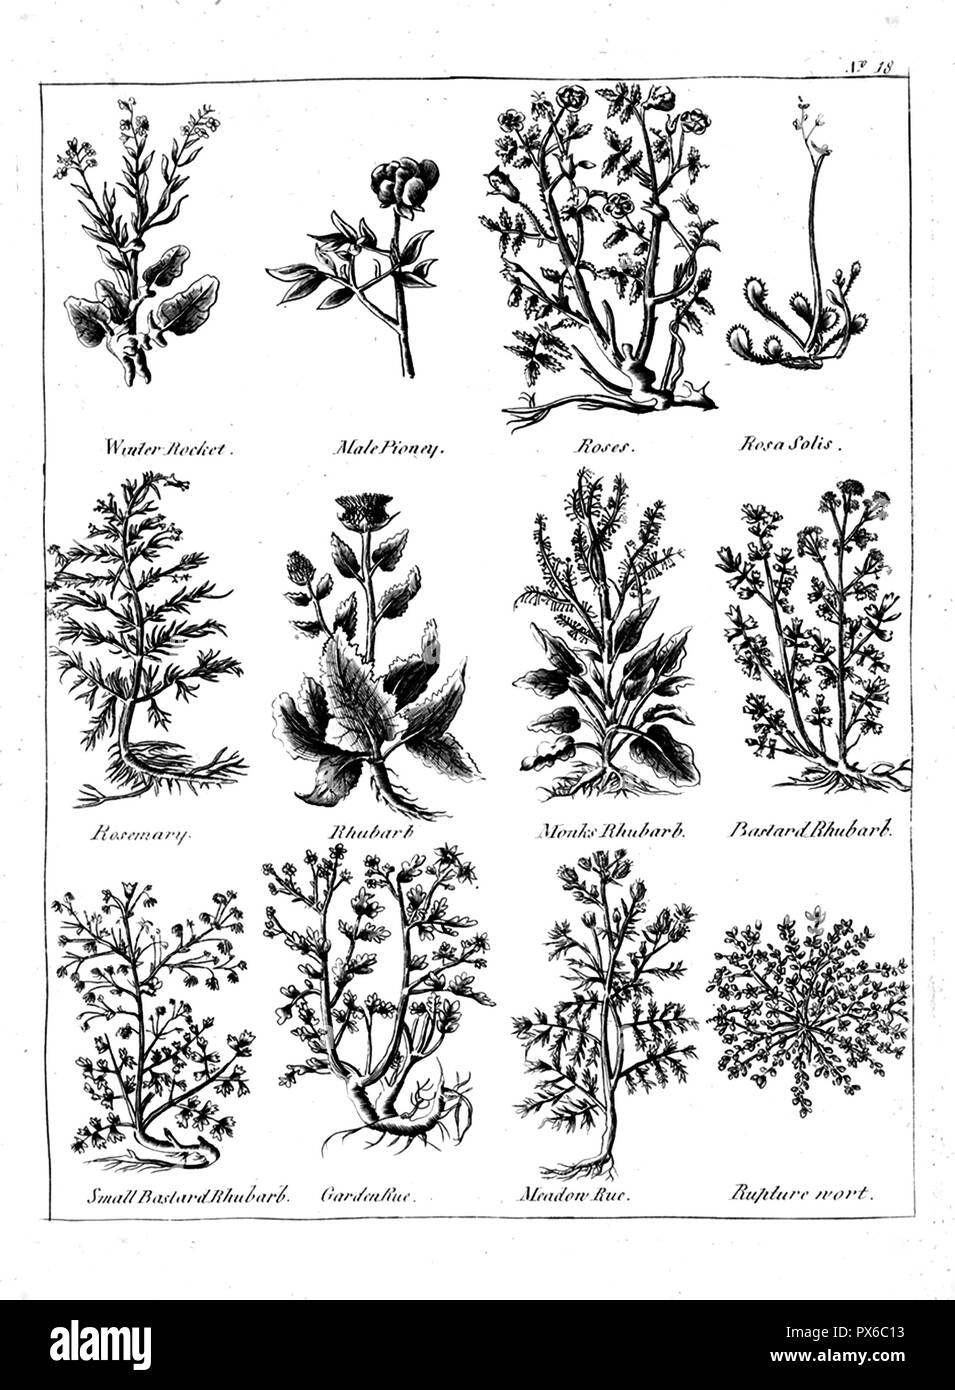 NICHOLAS CULPEPPER (1616-1654) English botanist, physician and astrologer. Page from his The English Physitian (1652) later called The Complete Herbal Stock Photo